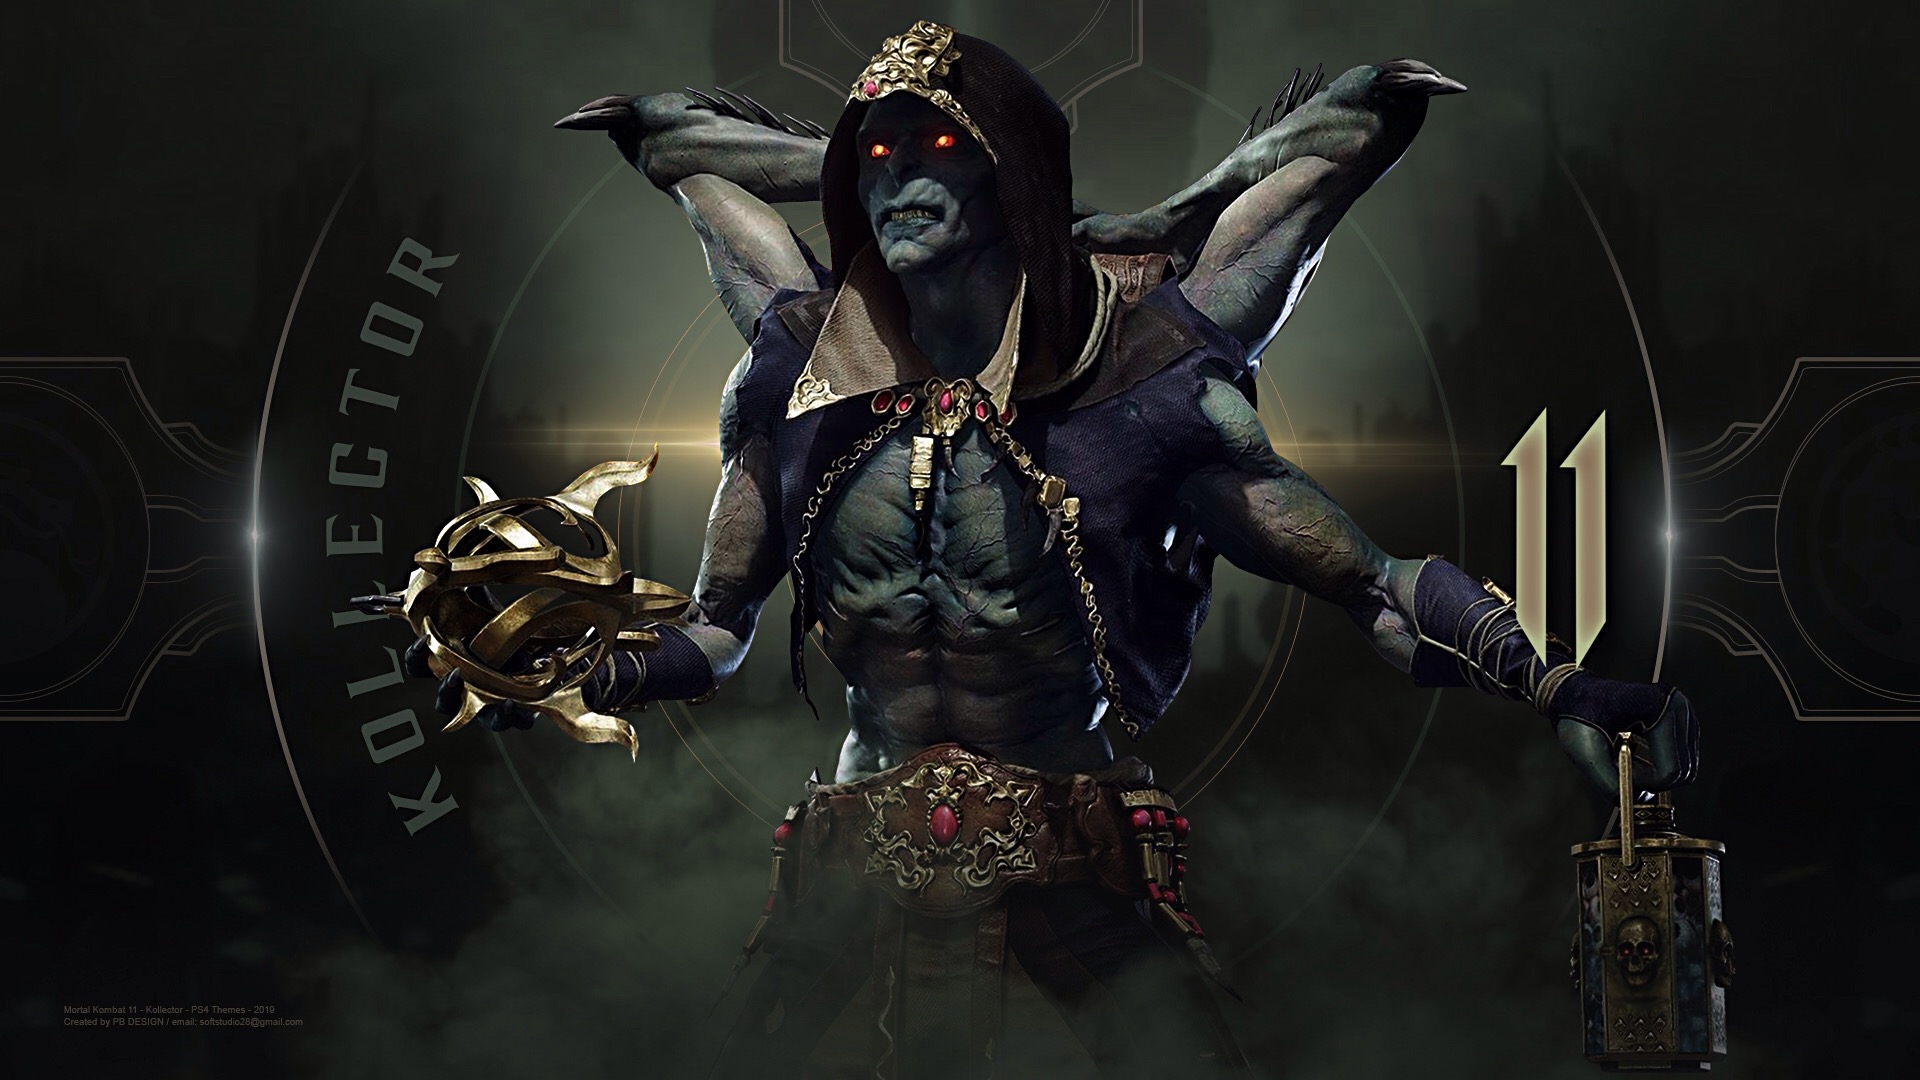 MK11   Kollector   New PS4 Themes   by PBD by PBDesign28 1920x1080